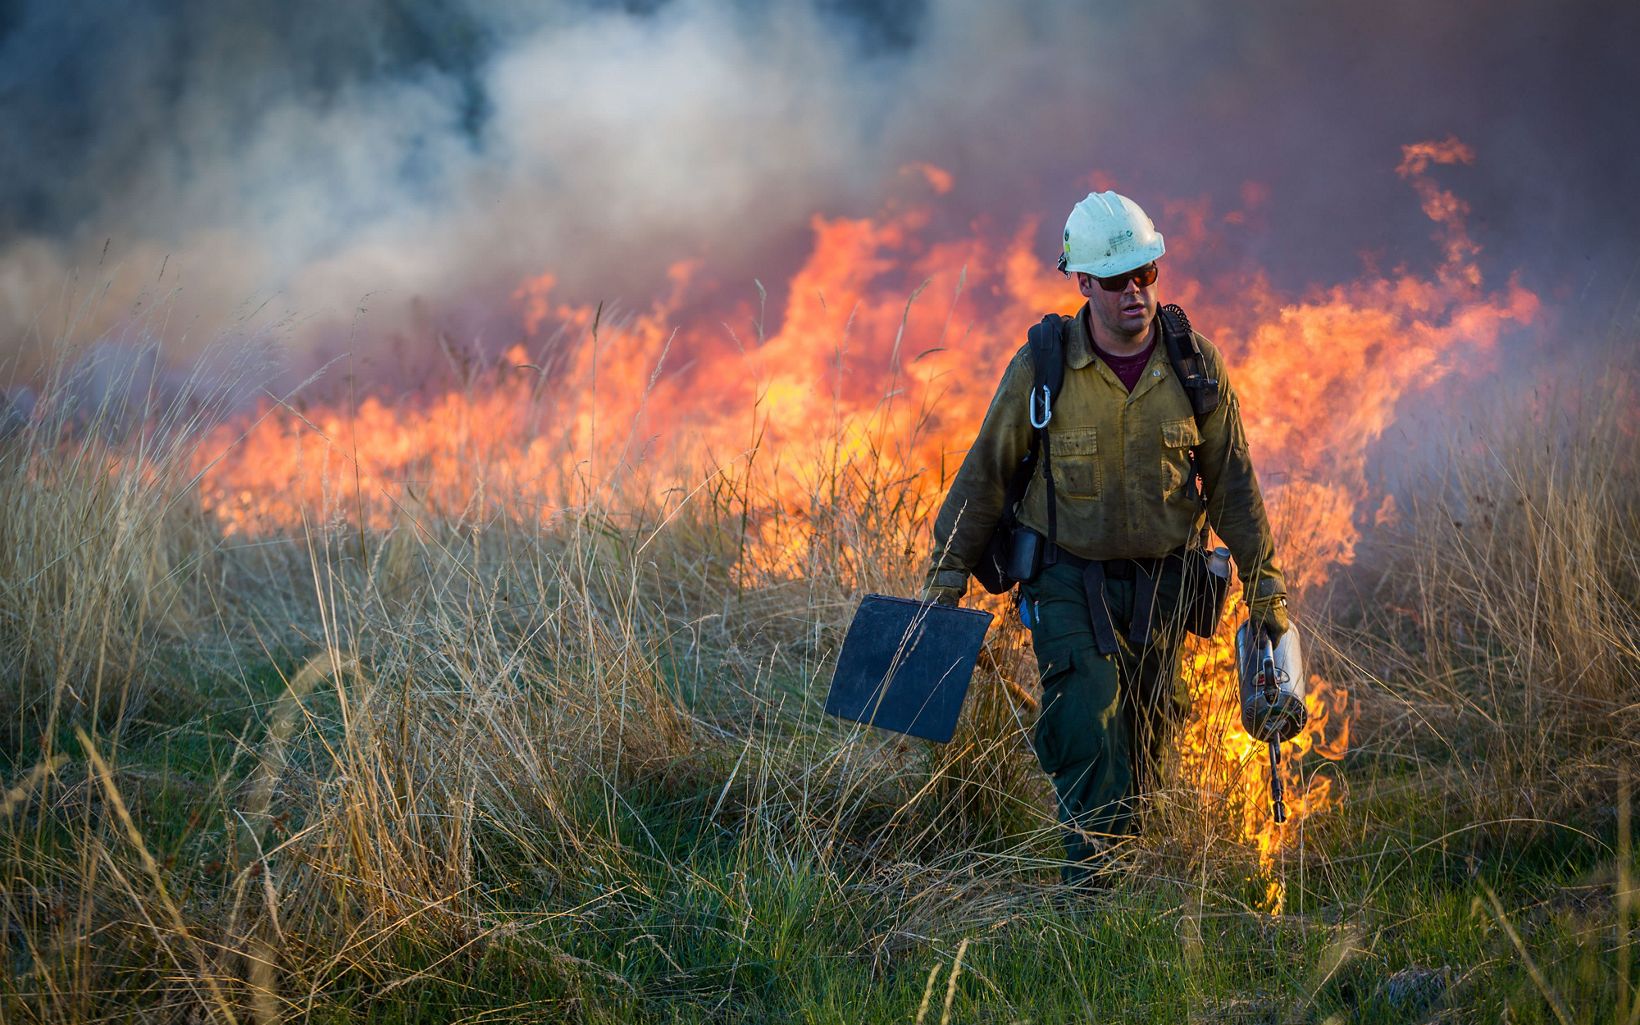 Prescribed burn, Oregon Controlled burns can reduce carbon emissions and prevent larger wildfires that threaten communities. © Jason Houston